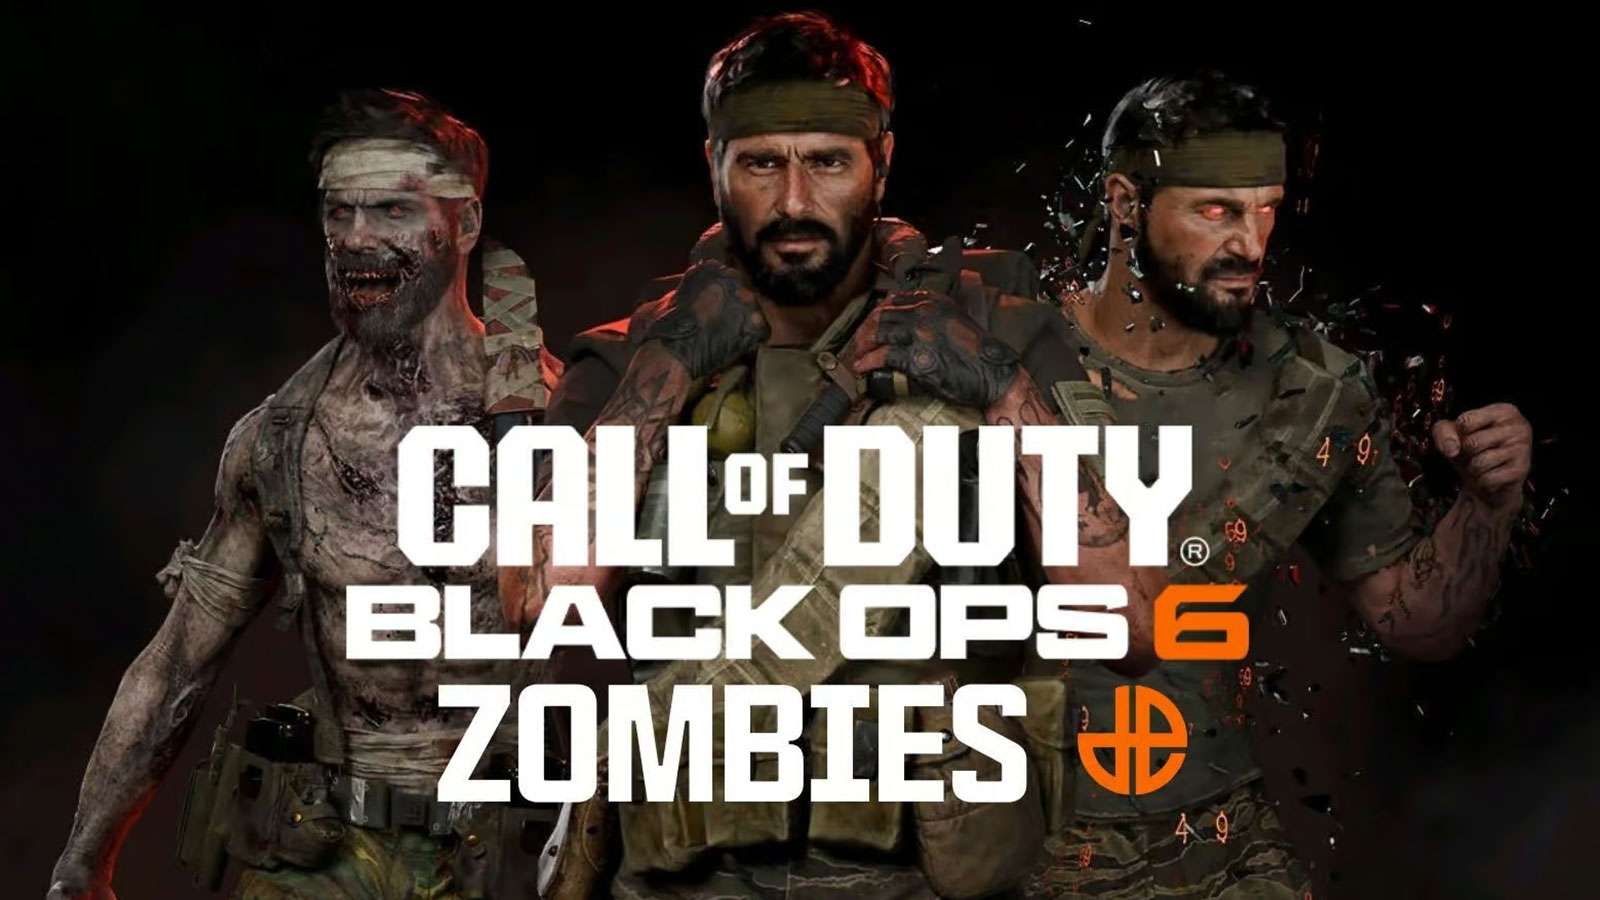 Frank Woods Zombies Black Ops 6